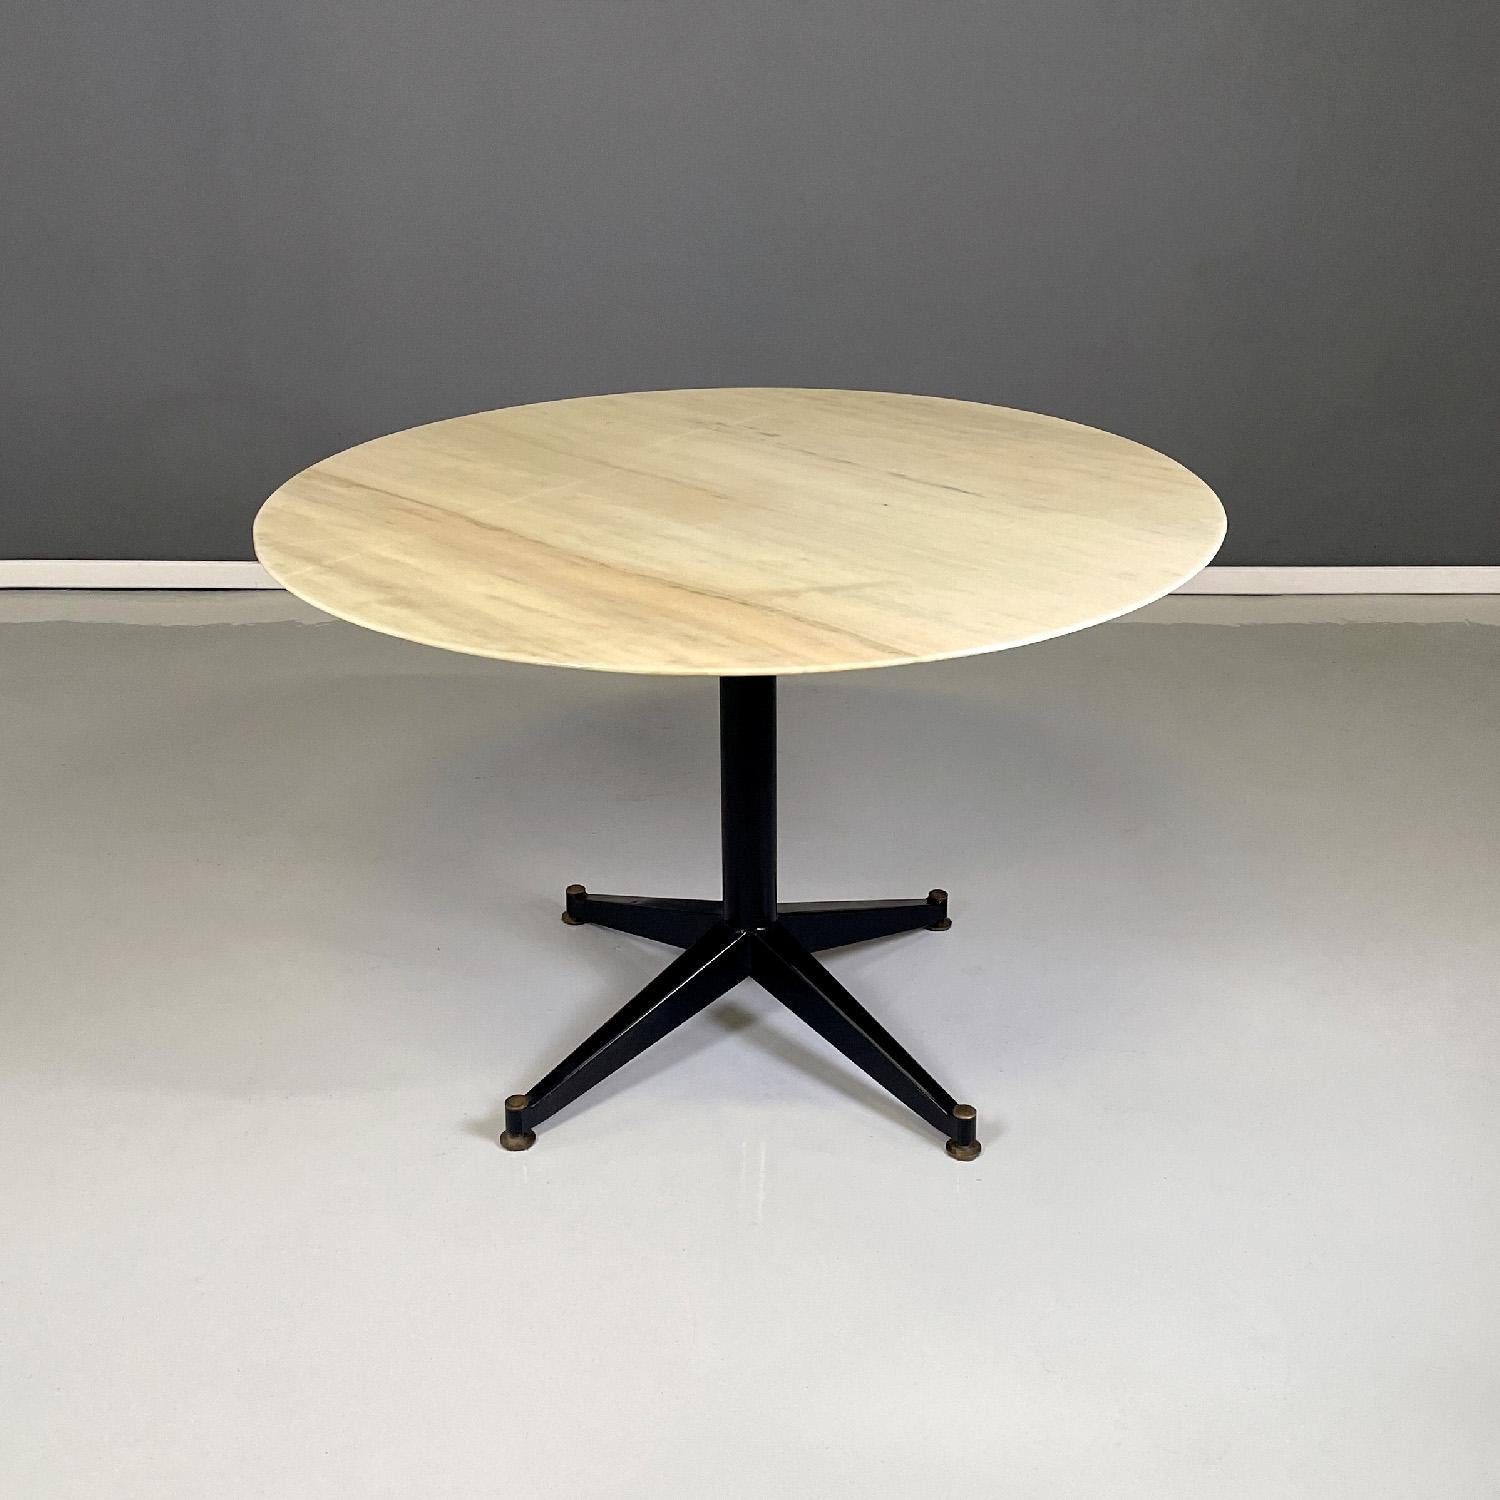 Italian mid-century modern dining table with Pink Portugal marble top, 1950s
Dining table with round top in Pink Portugal marble. The structure is in black painted metal, it is composed of a central stem and four spokes that end with a round brass